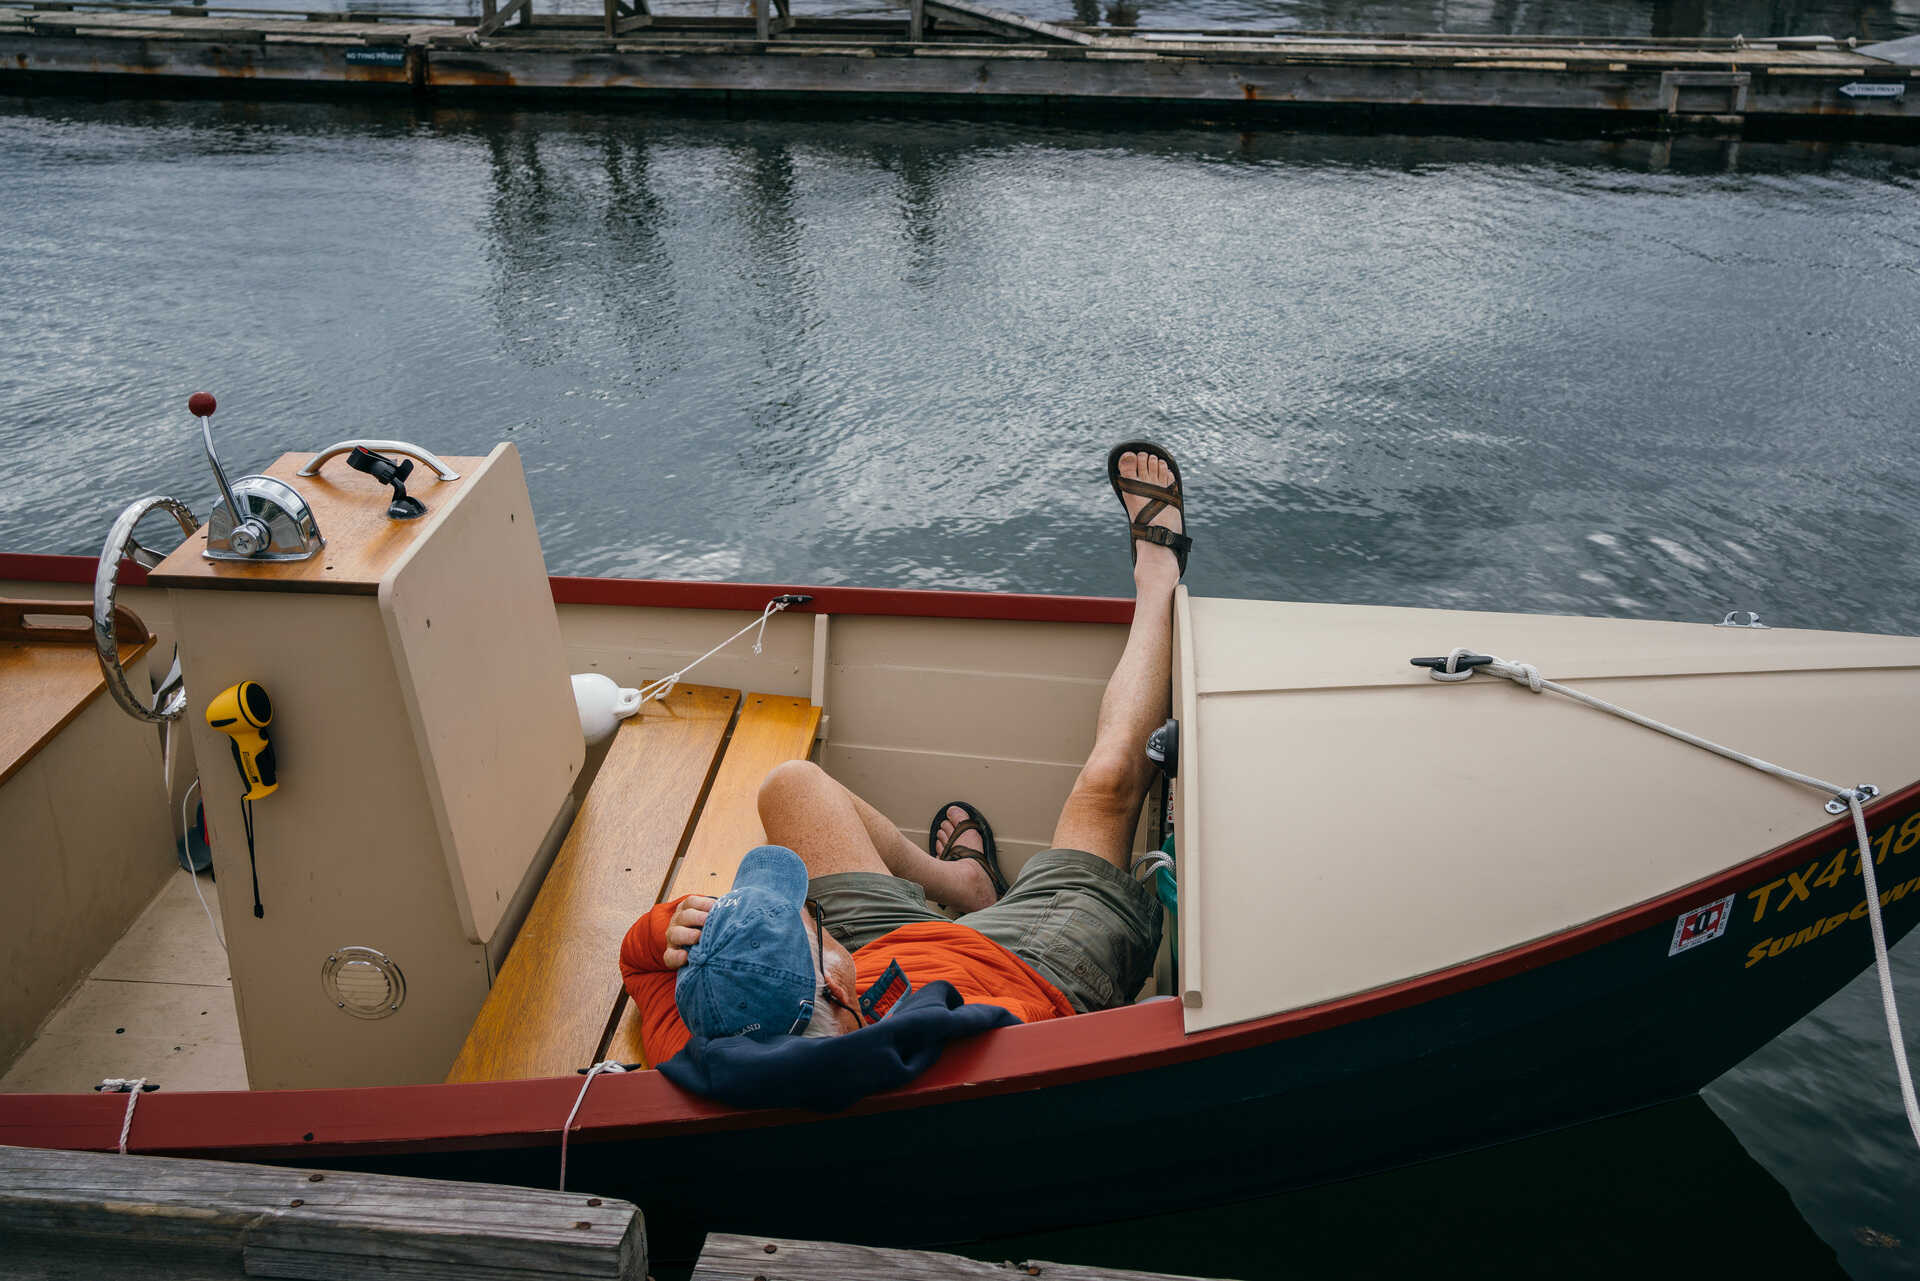 Man sleeping in a boat in BoothBay Harbor, Maine